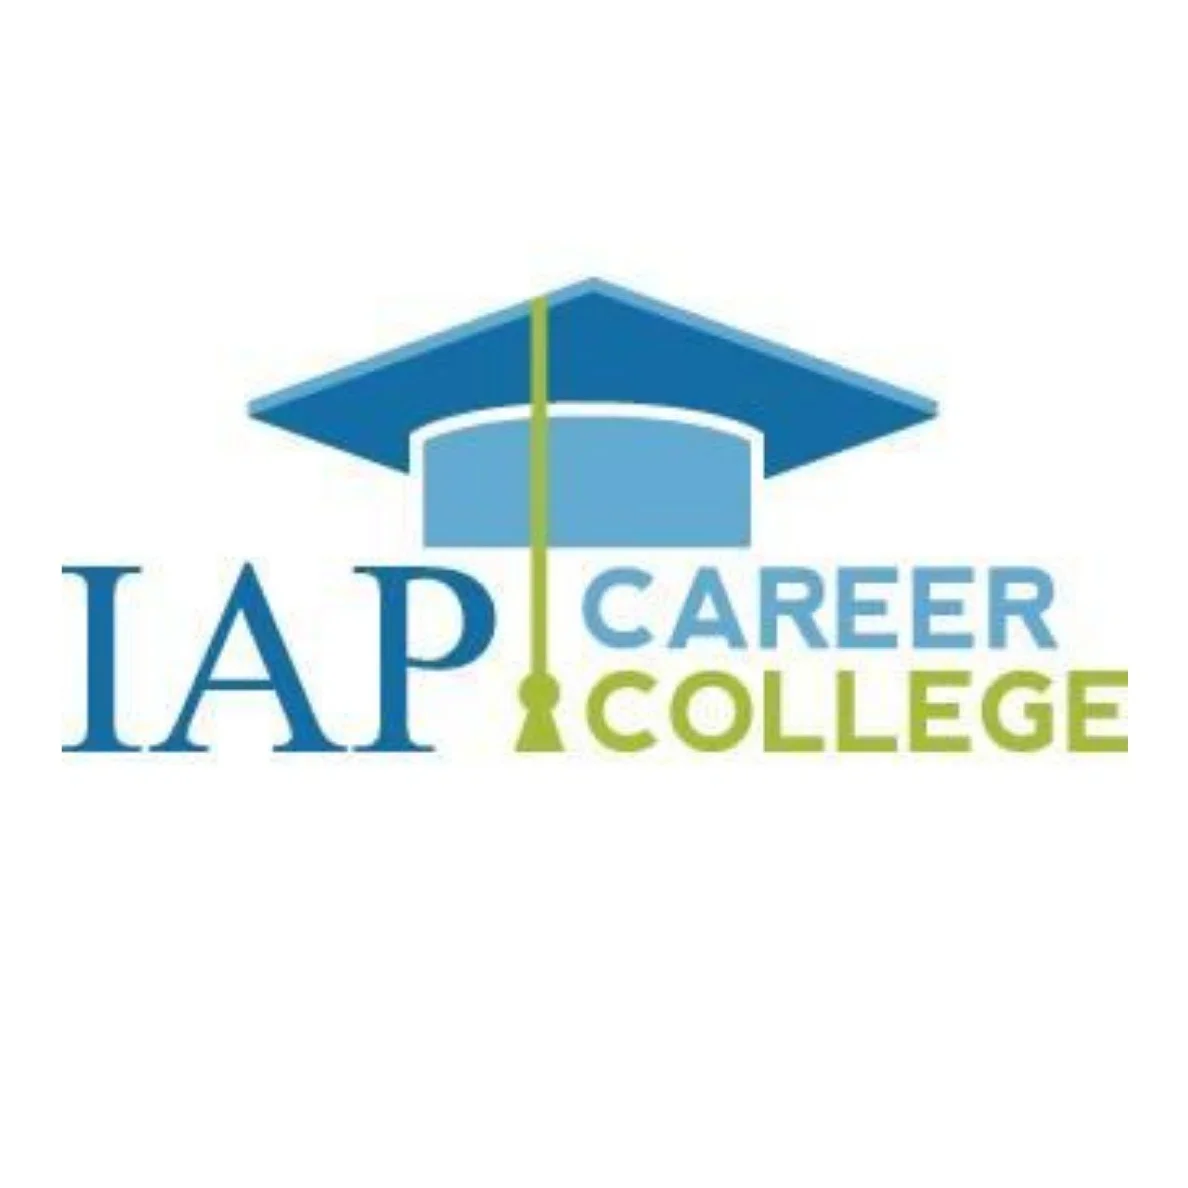 Iap Career College Promo Codes & Coupons